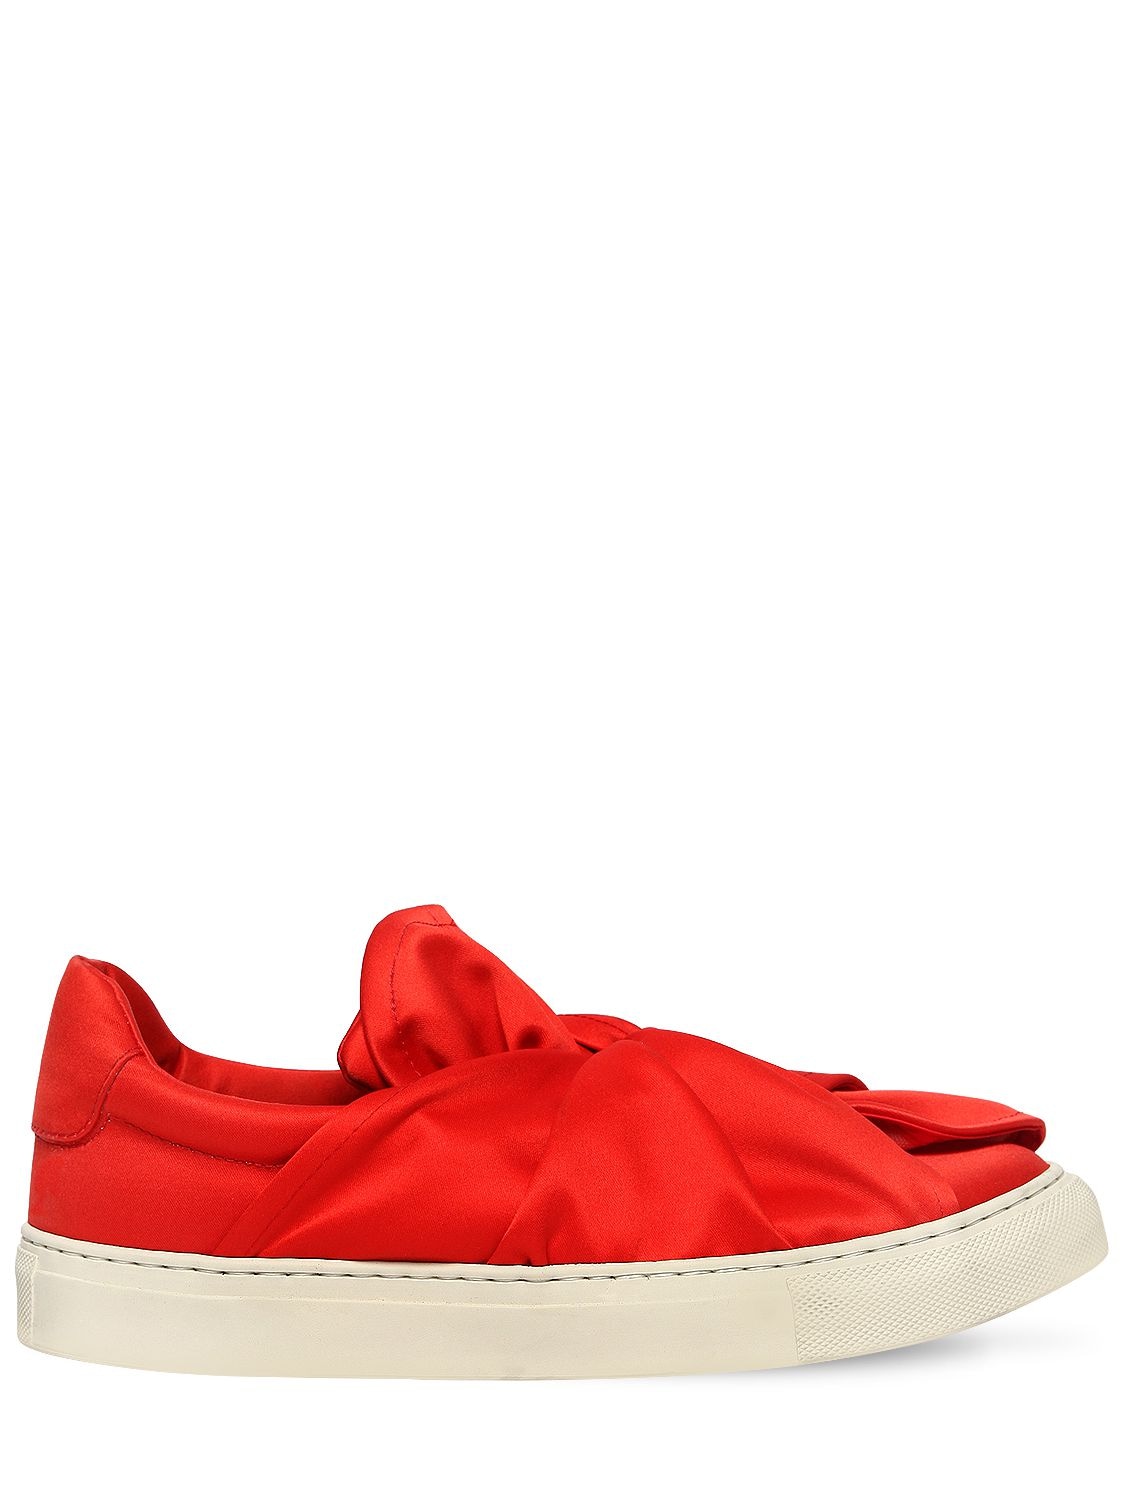 Image of 20mm Knot Satin Slip-on Sneakers